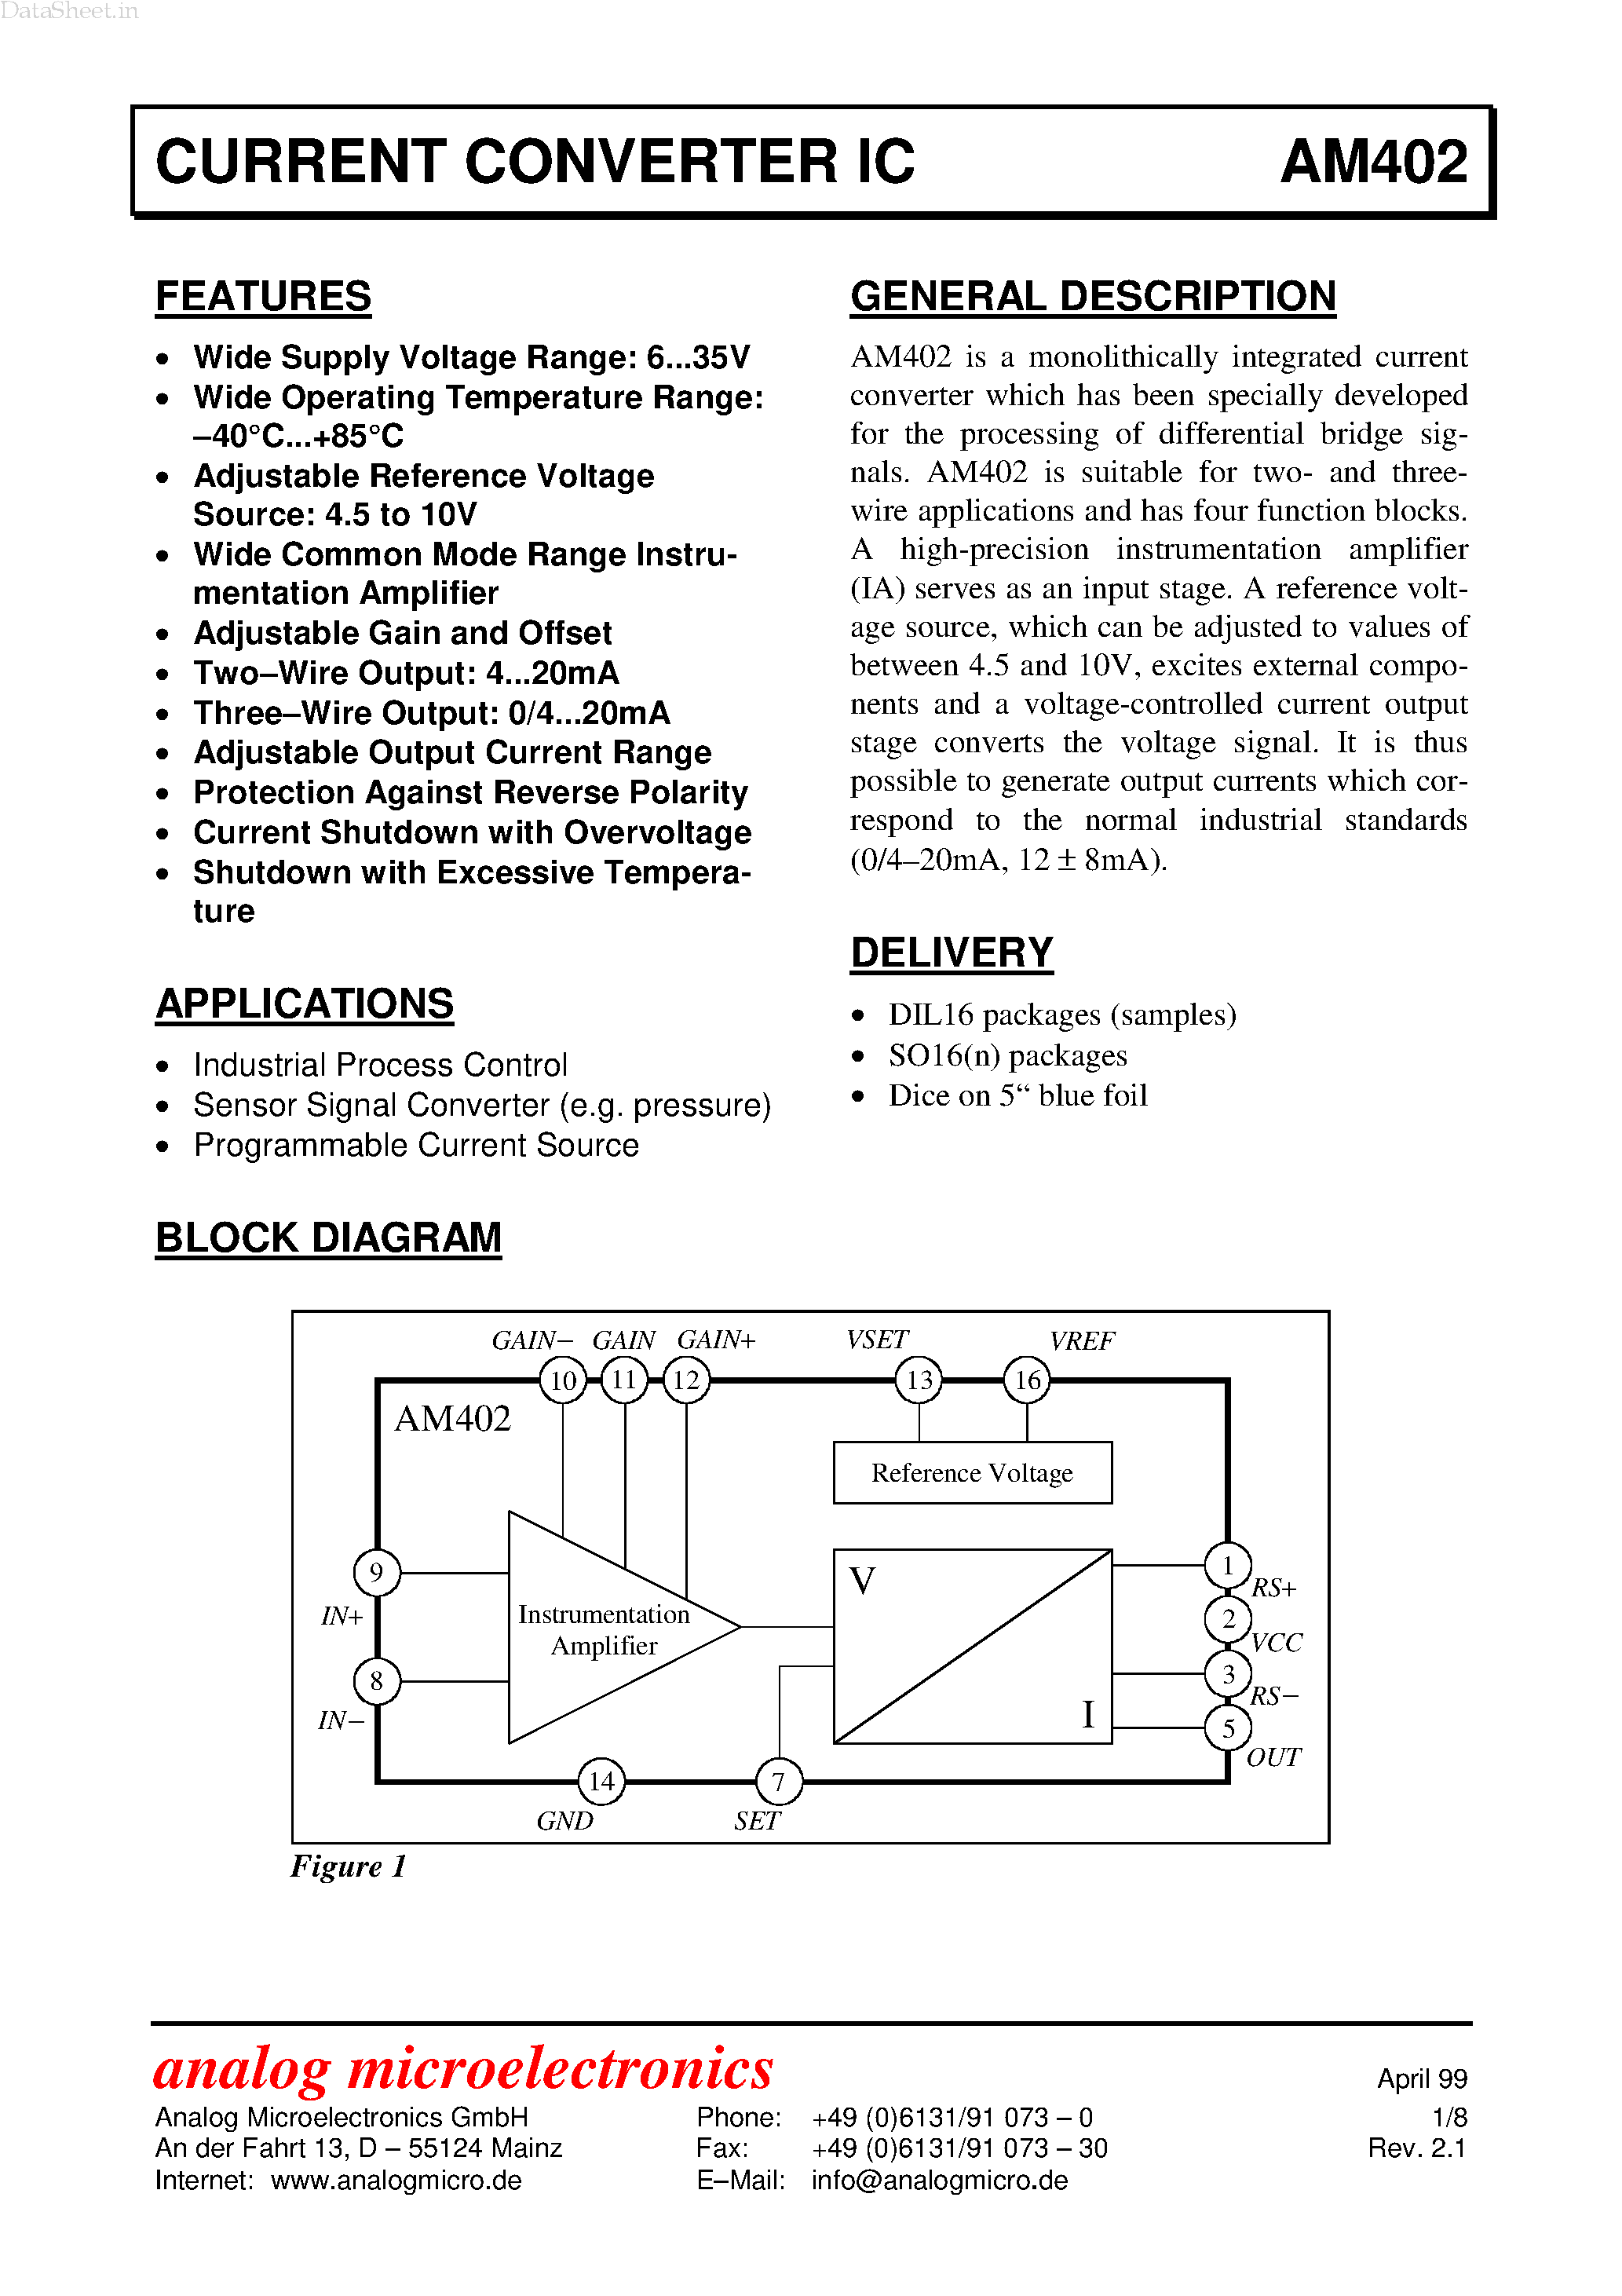 Datasheet AM402 - CURRENT CONVERTER IC page 1